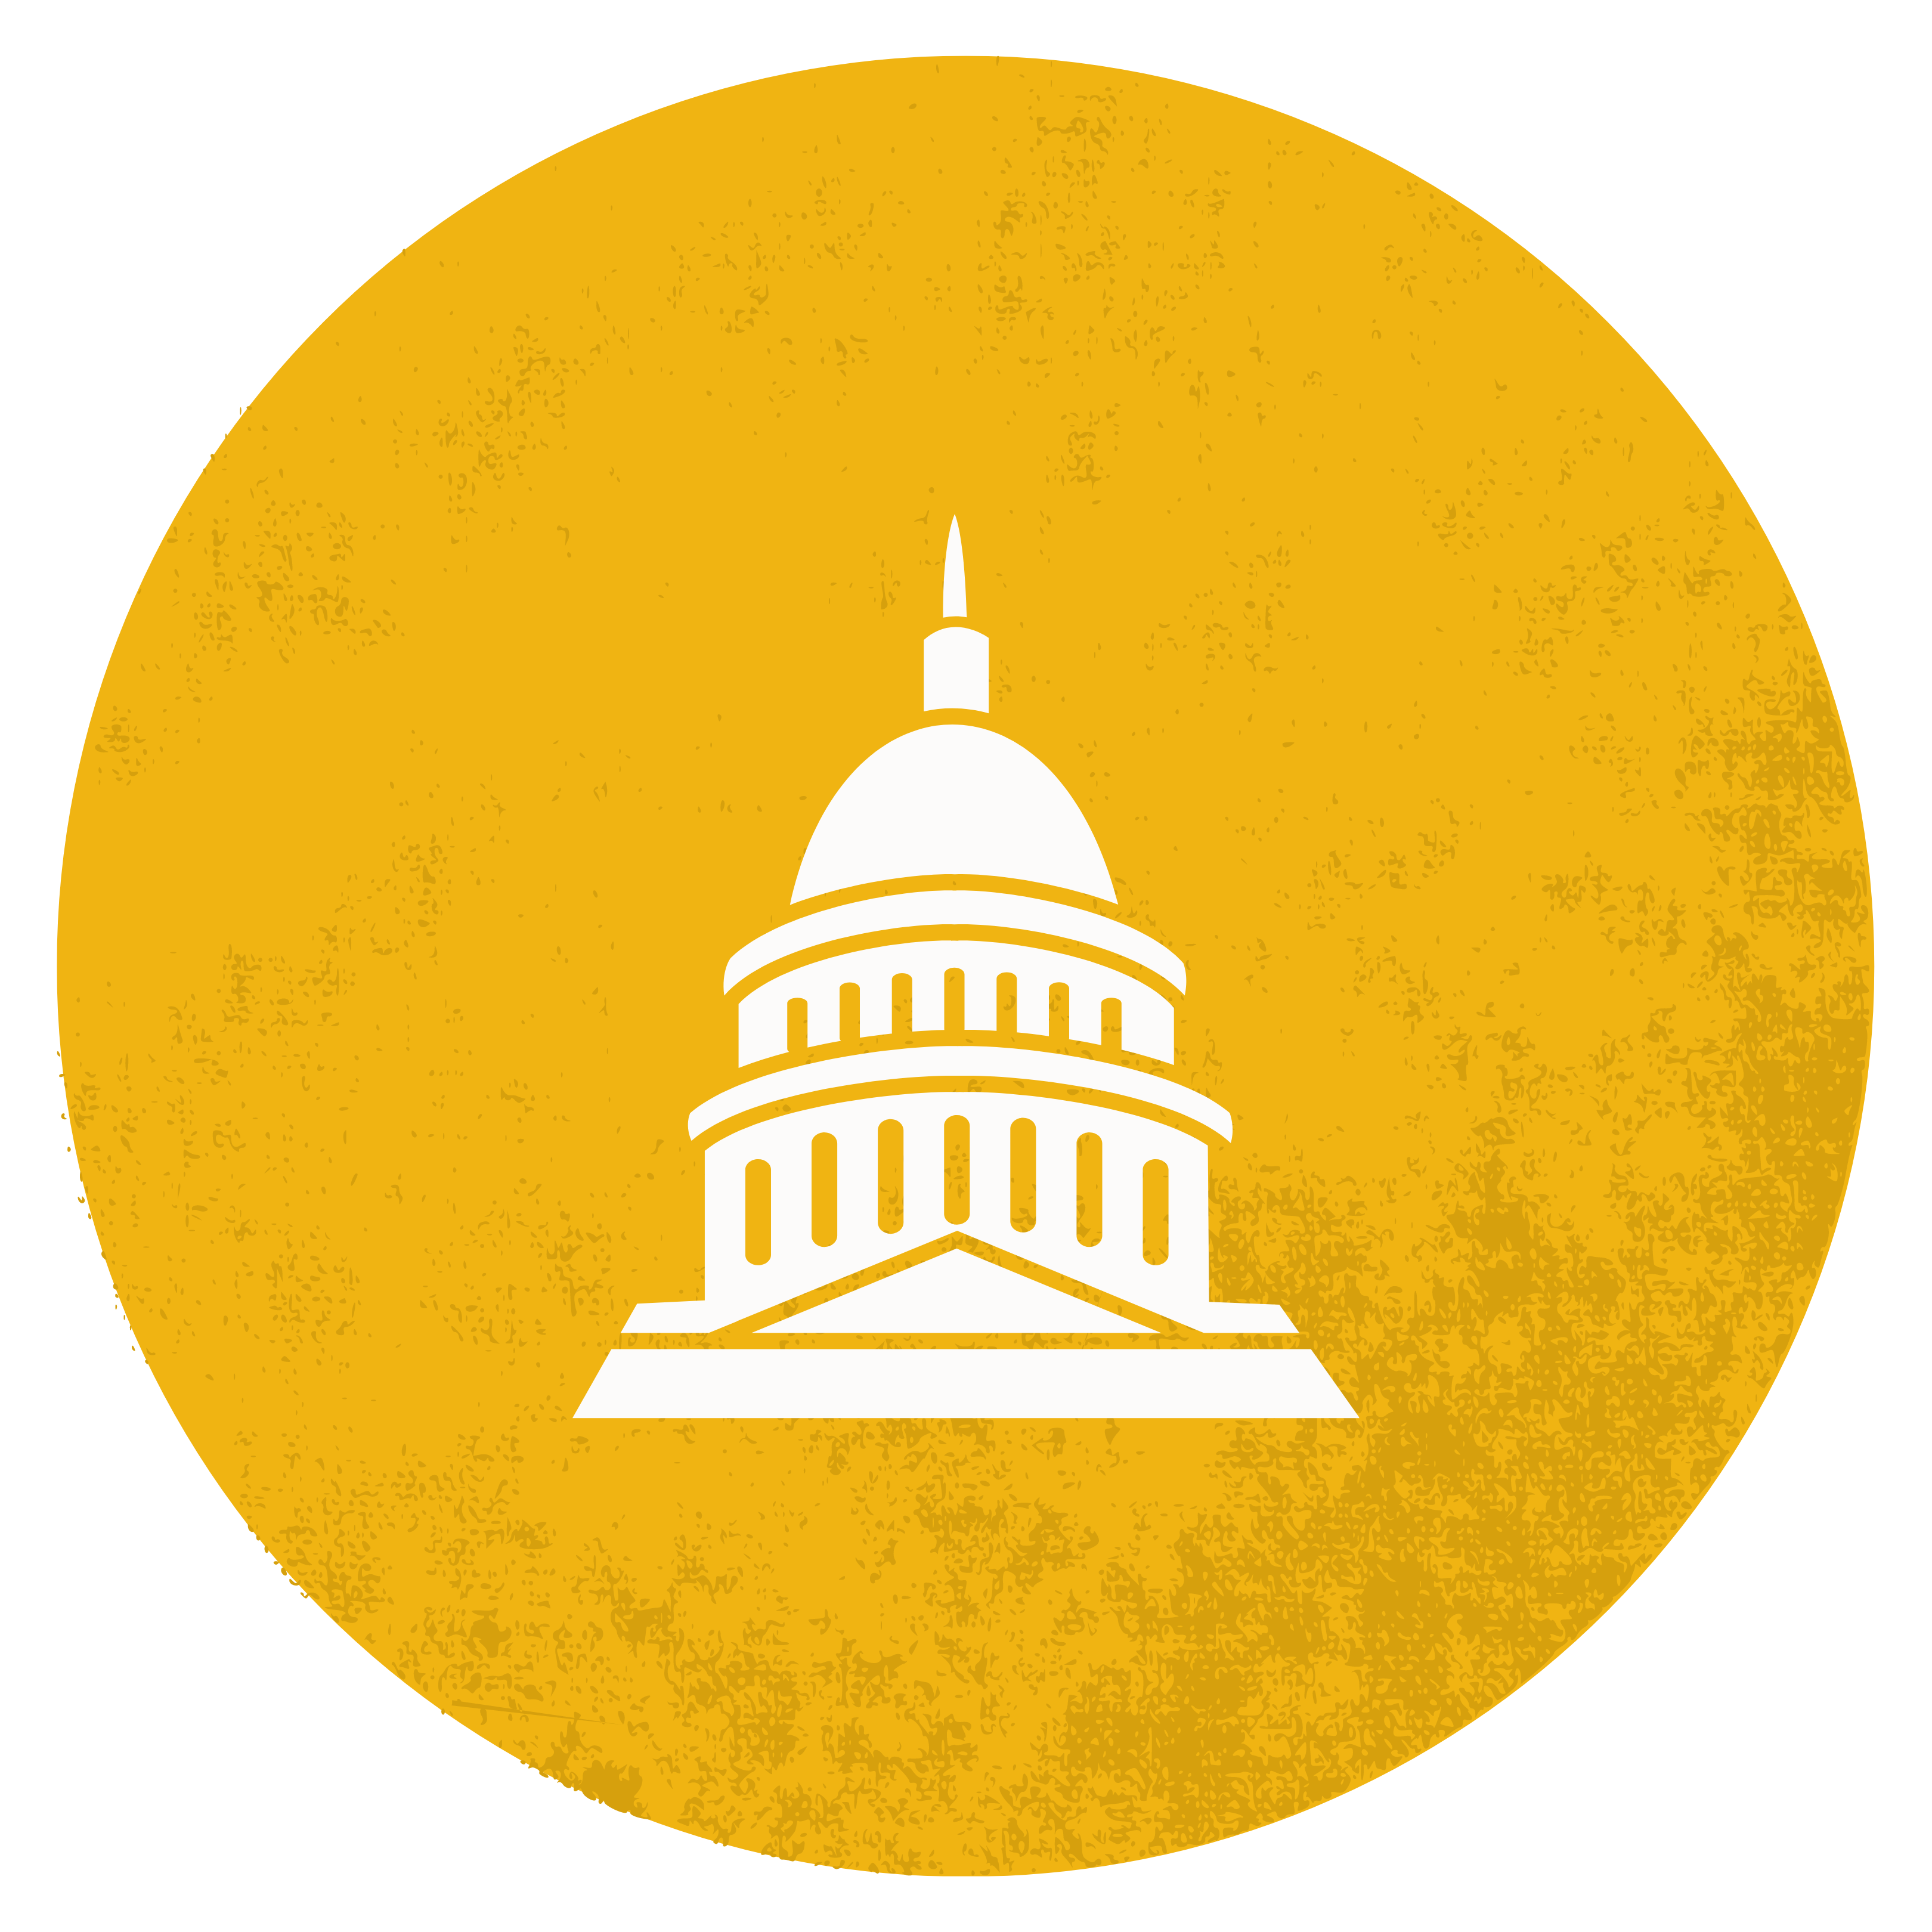 Silhouette of a Capitol building on a golden background.